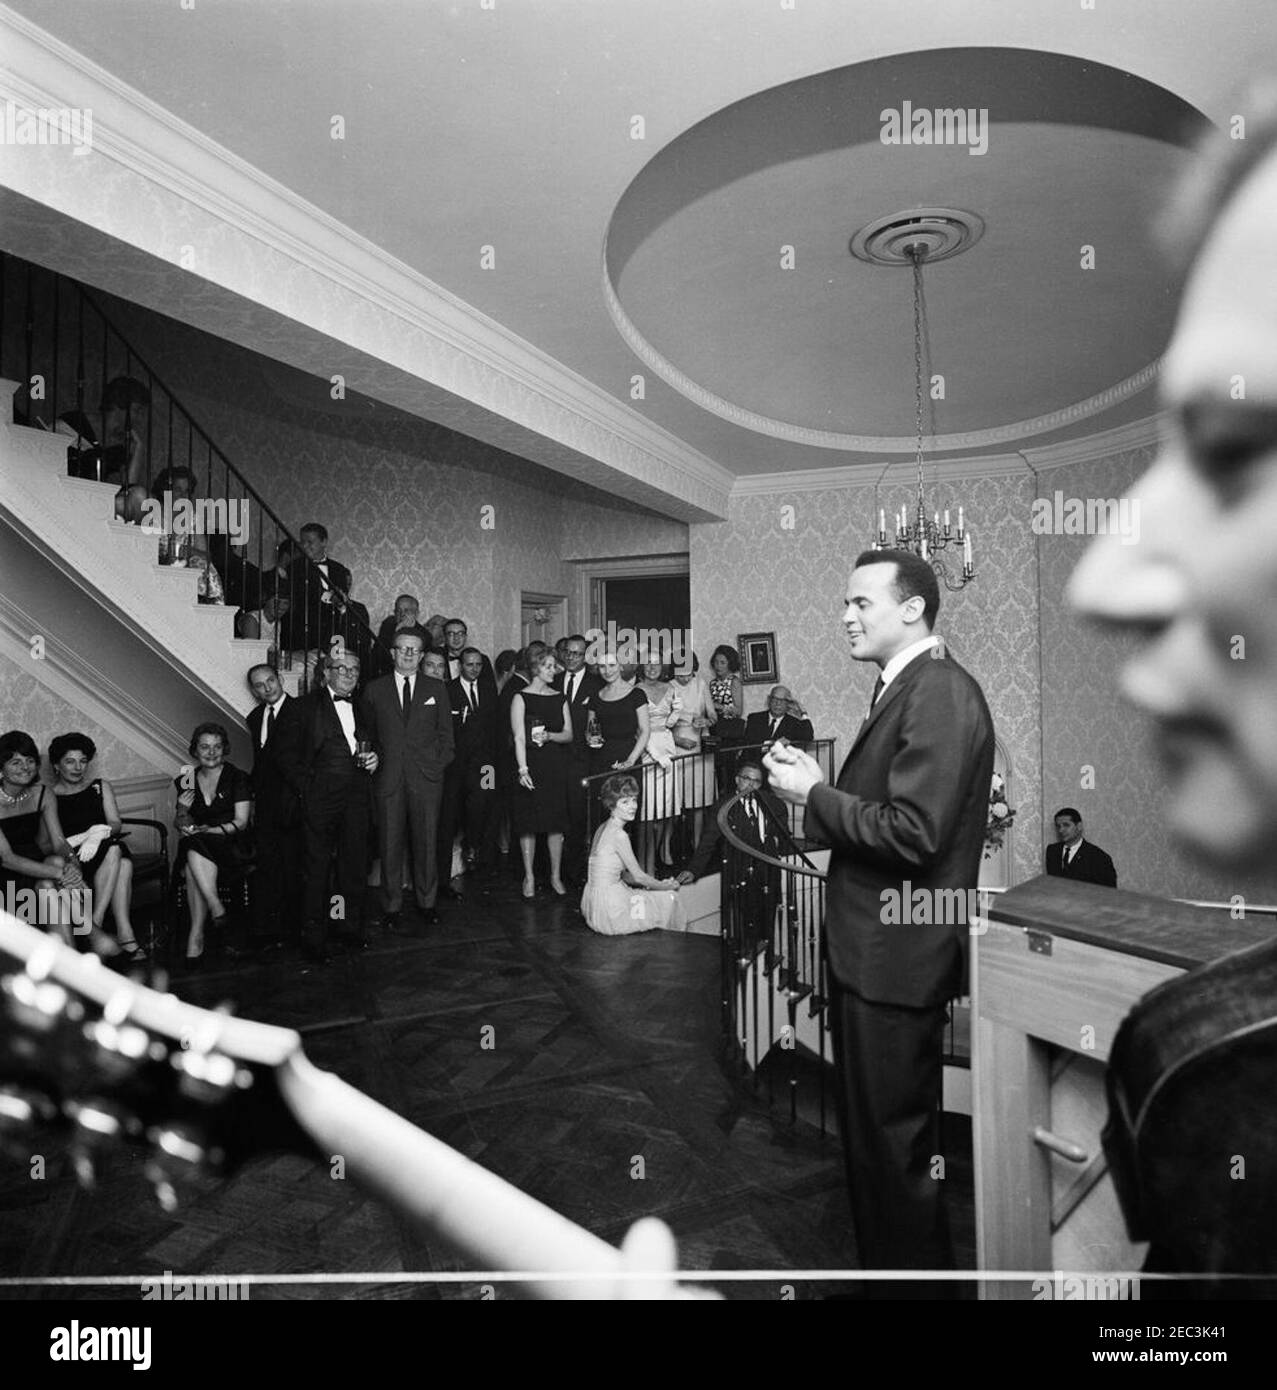 Trip to New York City: Reception, Arthur Krim Residence. Singer, Harry Belafonte (far right), performs during an evening reception at the residence of Arthur B. Krim and Dr. Mathilde Krim in New York City, New York. Also pictured: Patricia Kennedy Lawford; Jean Kennedy Smith; comedian, Mike Nichols; Special Assistant to the President for Congressional Relations, Larry Ou0027Brien; White House Secret Service agent, Floyd Boring. Stock Photo